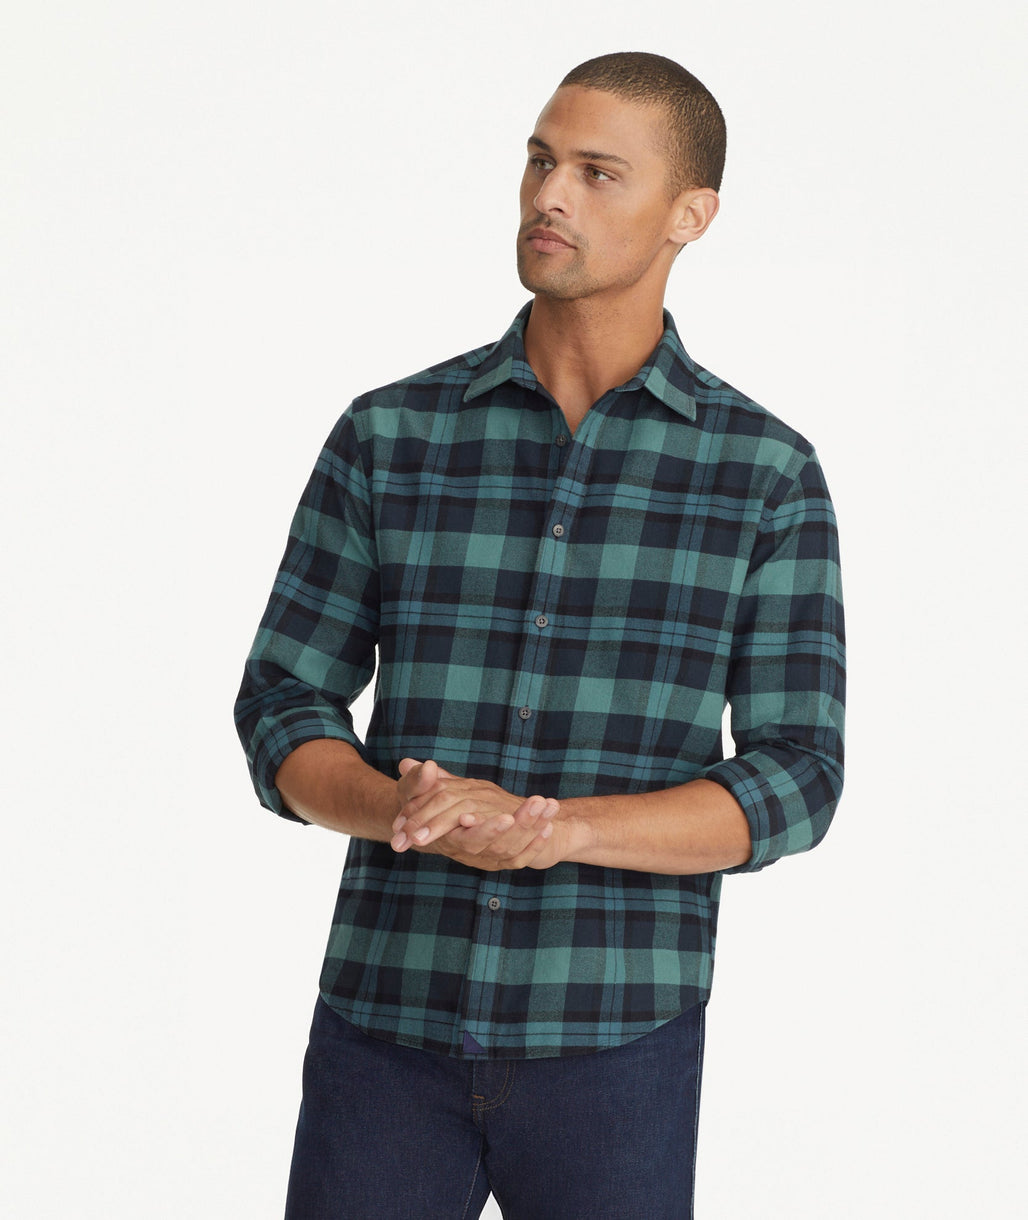 Model is wearing UNTUCKit Flannel Azedo Shirt in Teal & Navy Plaid.